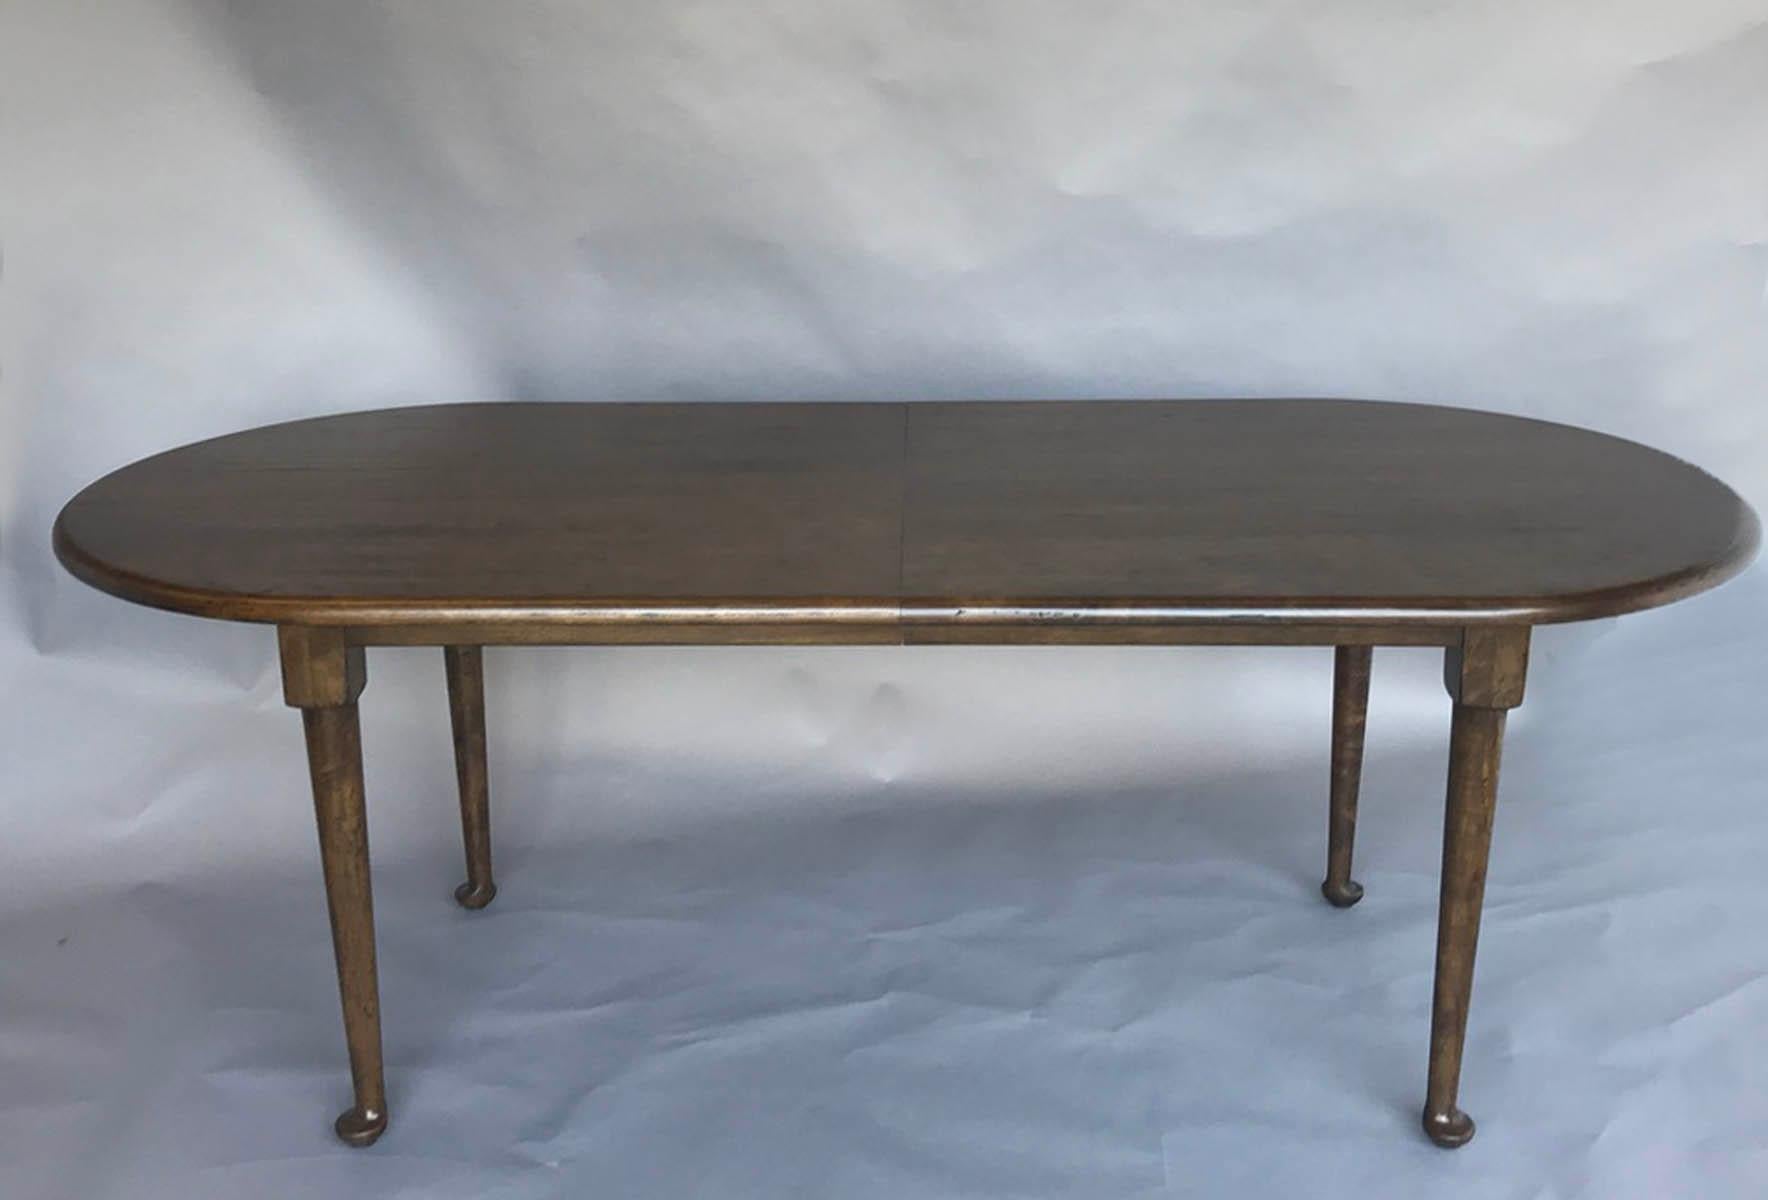 American Dos Gallos Studio Custom Walnut Wood Queen Anne Table with Extension Leaves For Sale